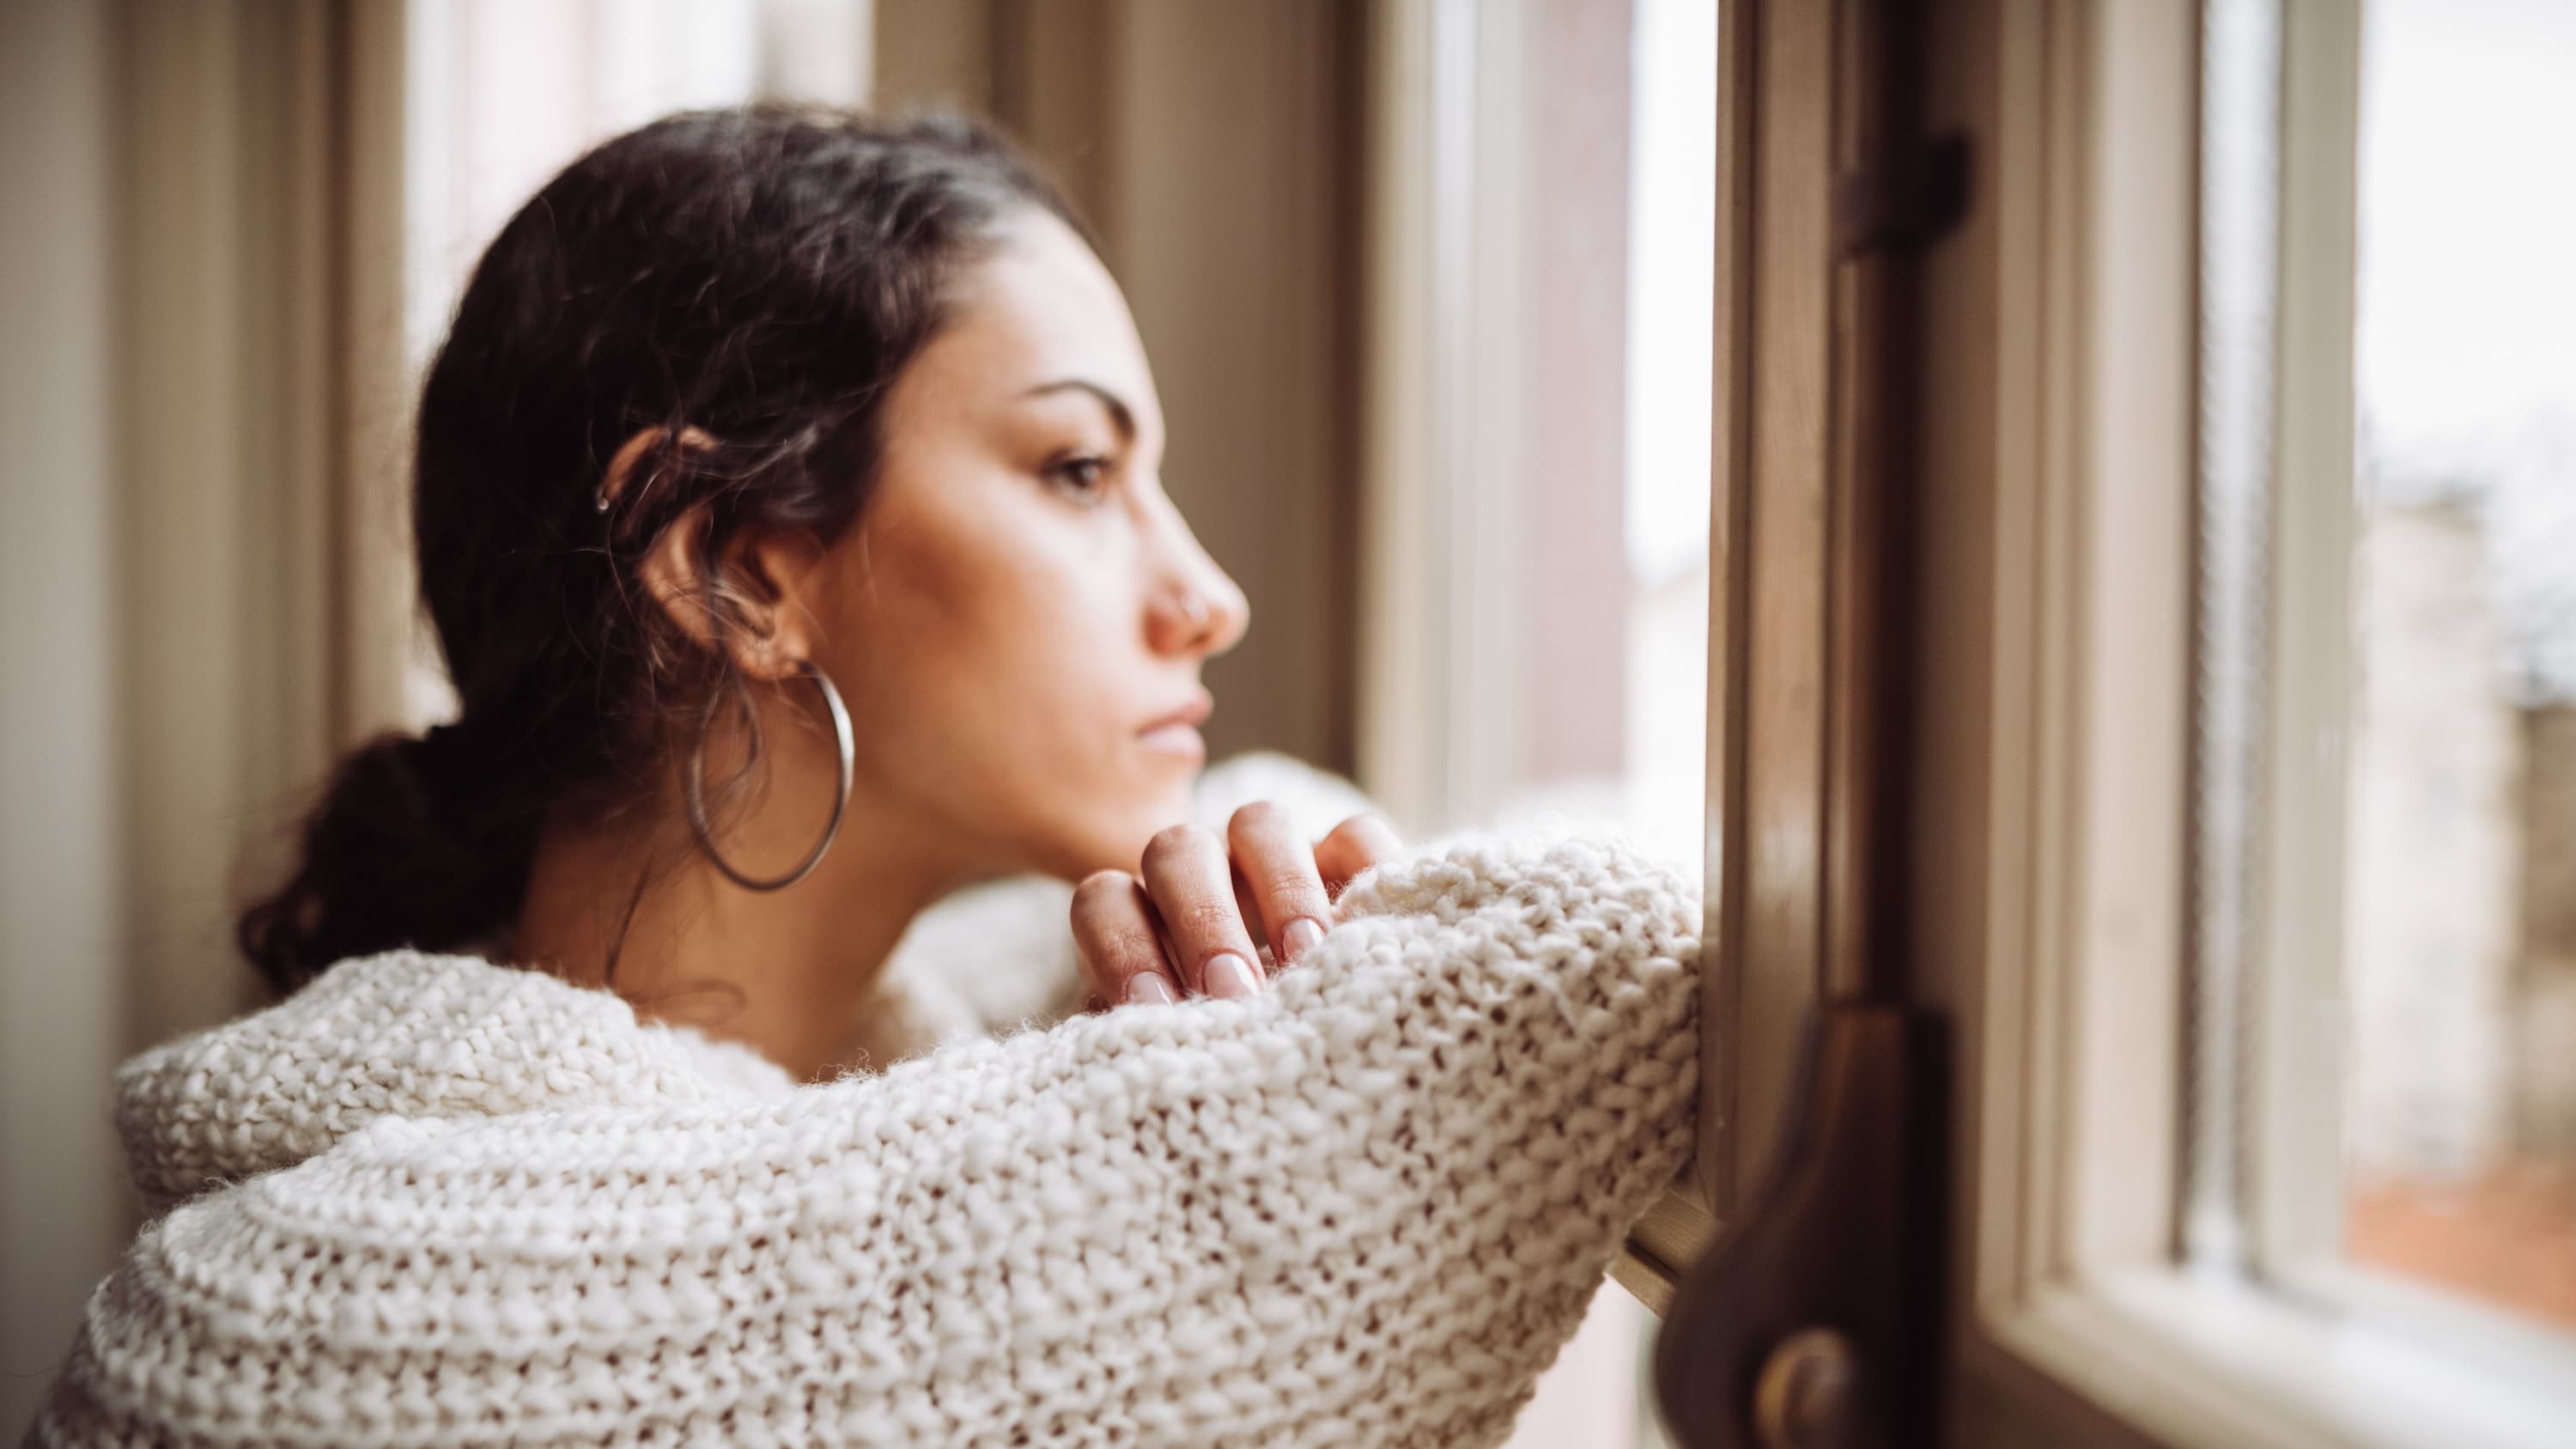 pensive woman in front of the window, thinking about advanced directives, especially amid COVID